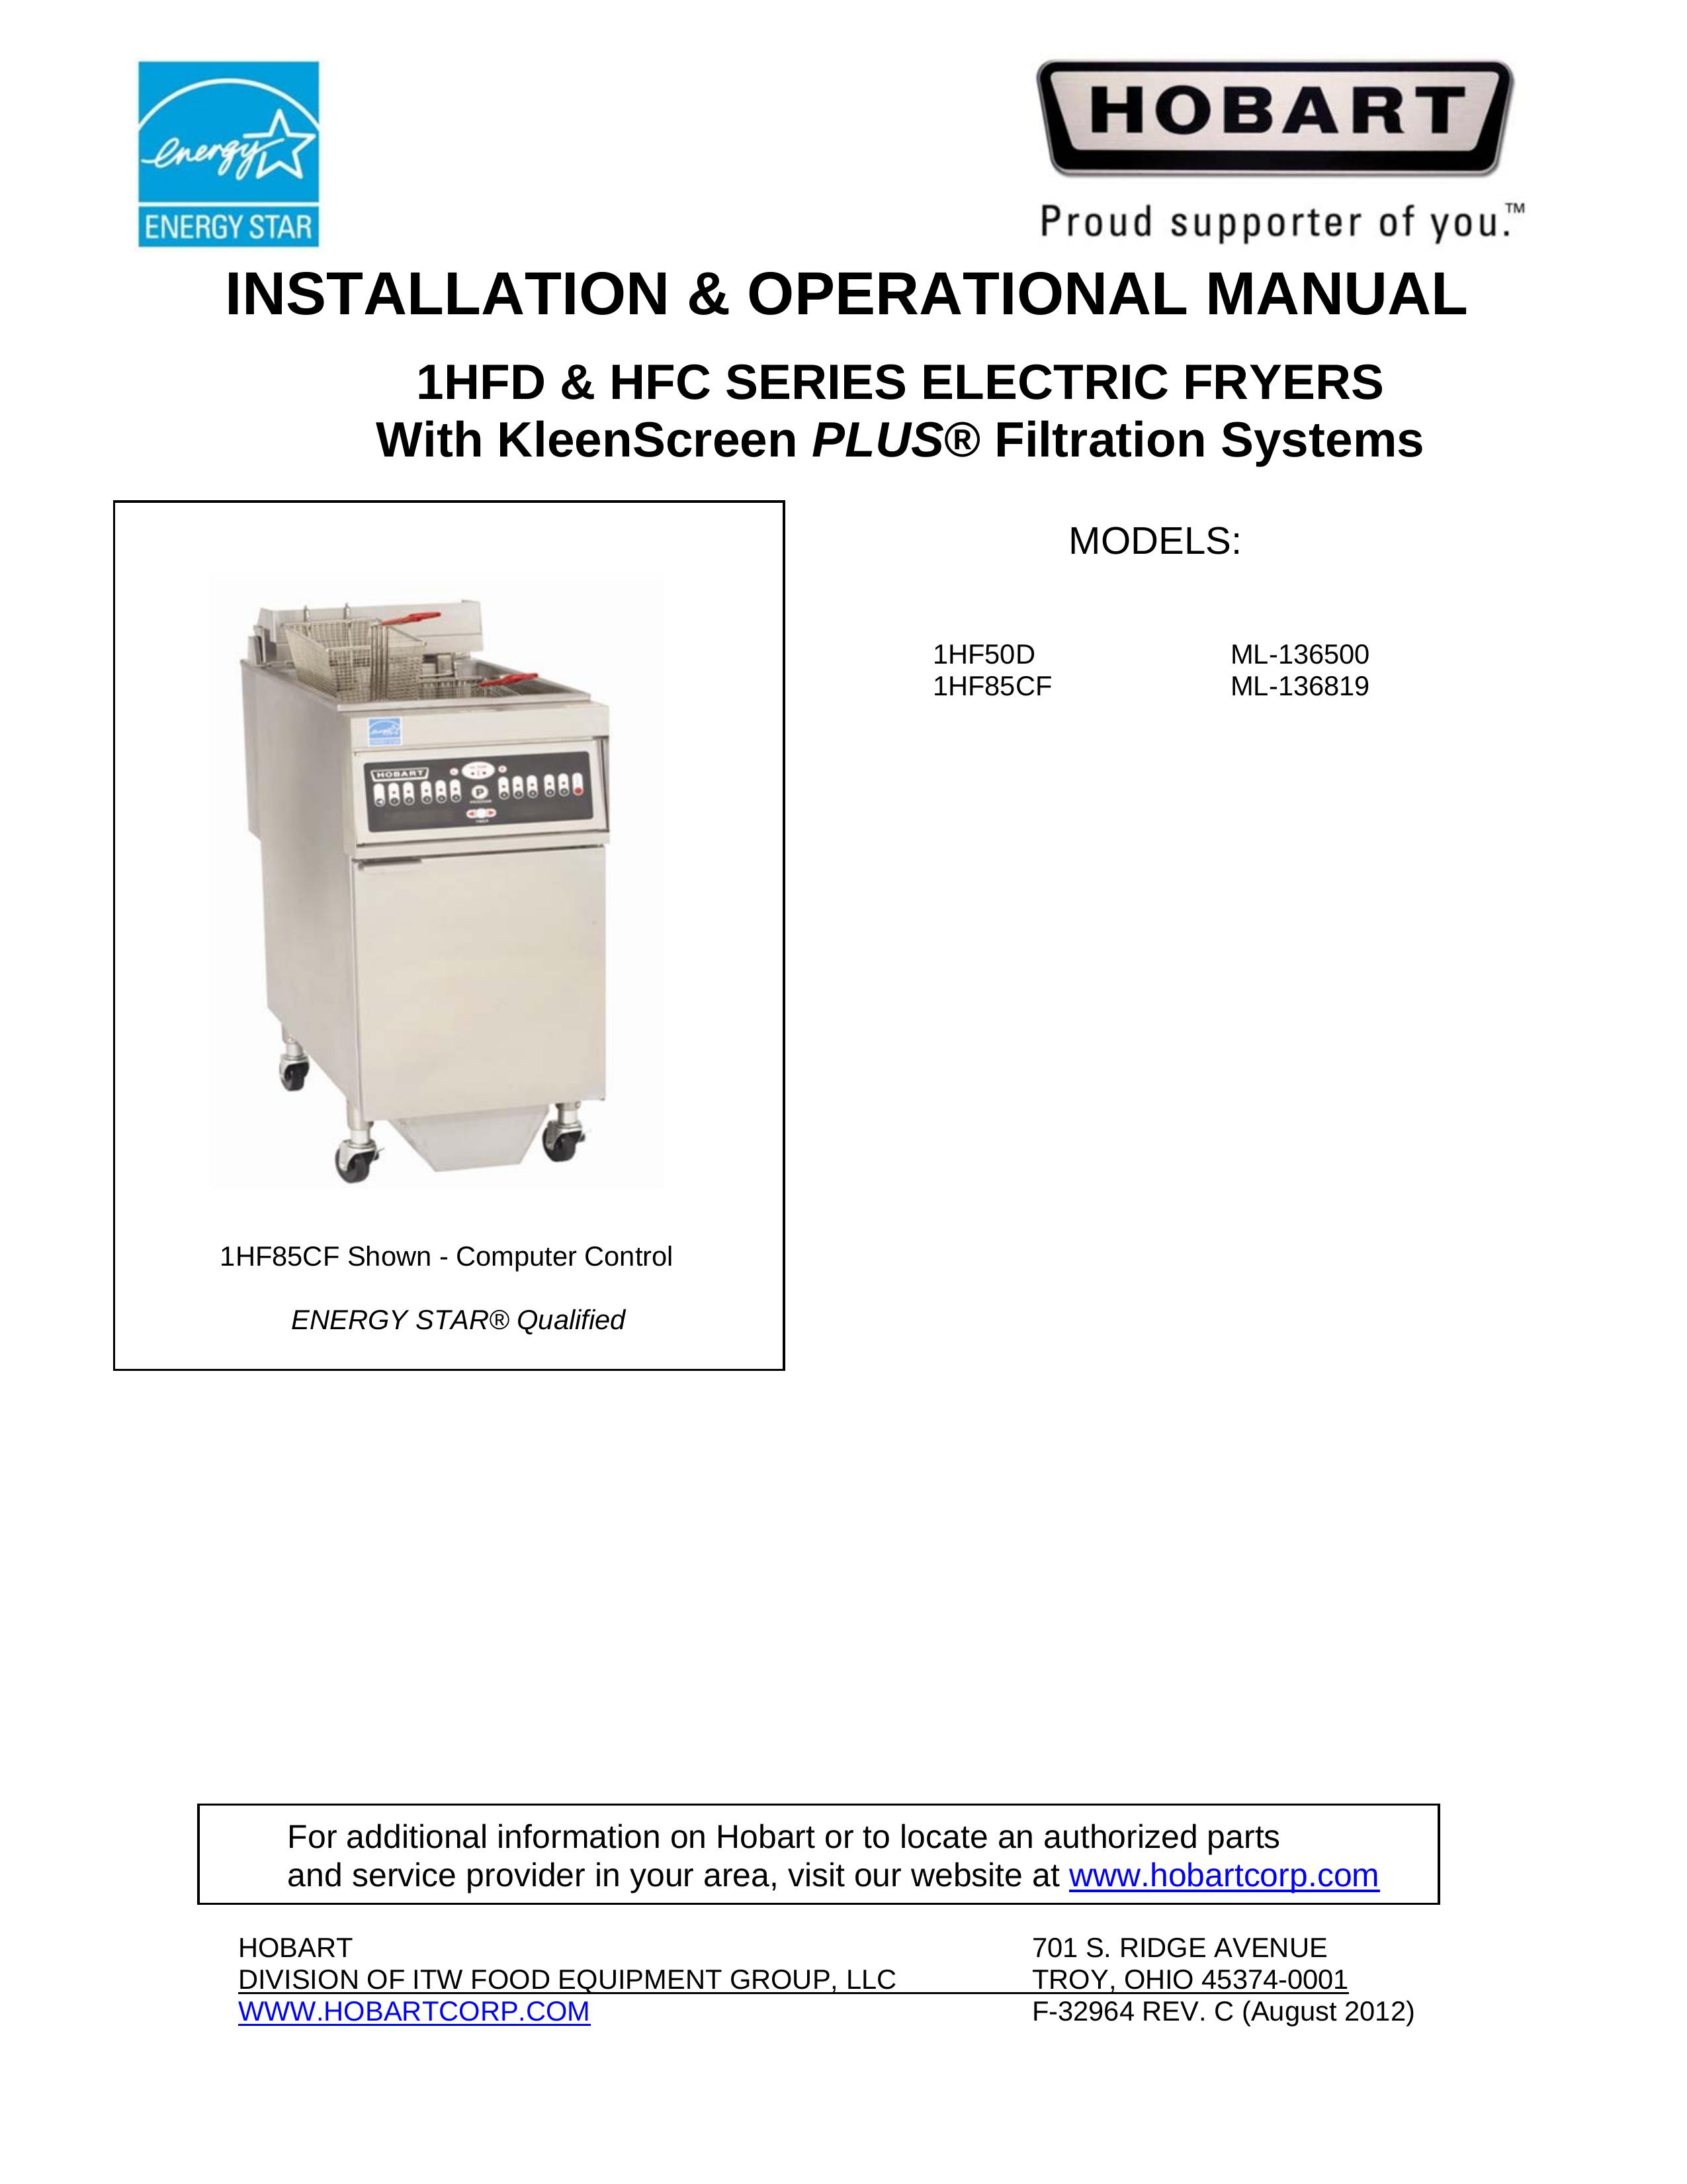 Hobart ML-136819 Clothes Dryer User Manual